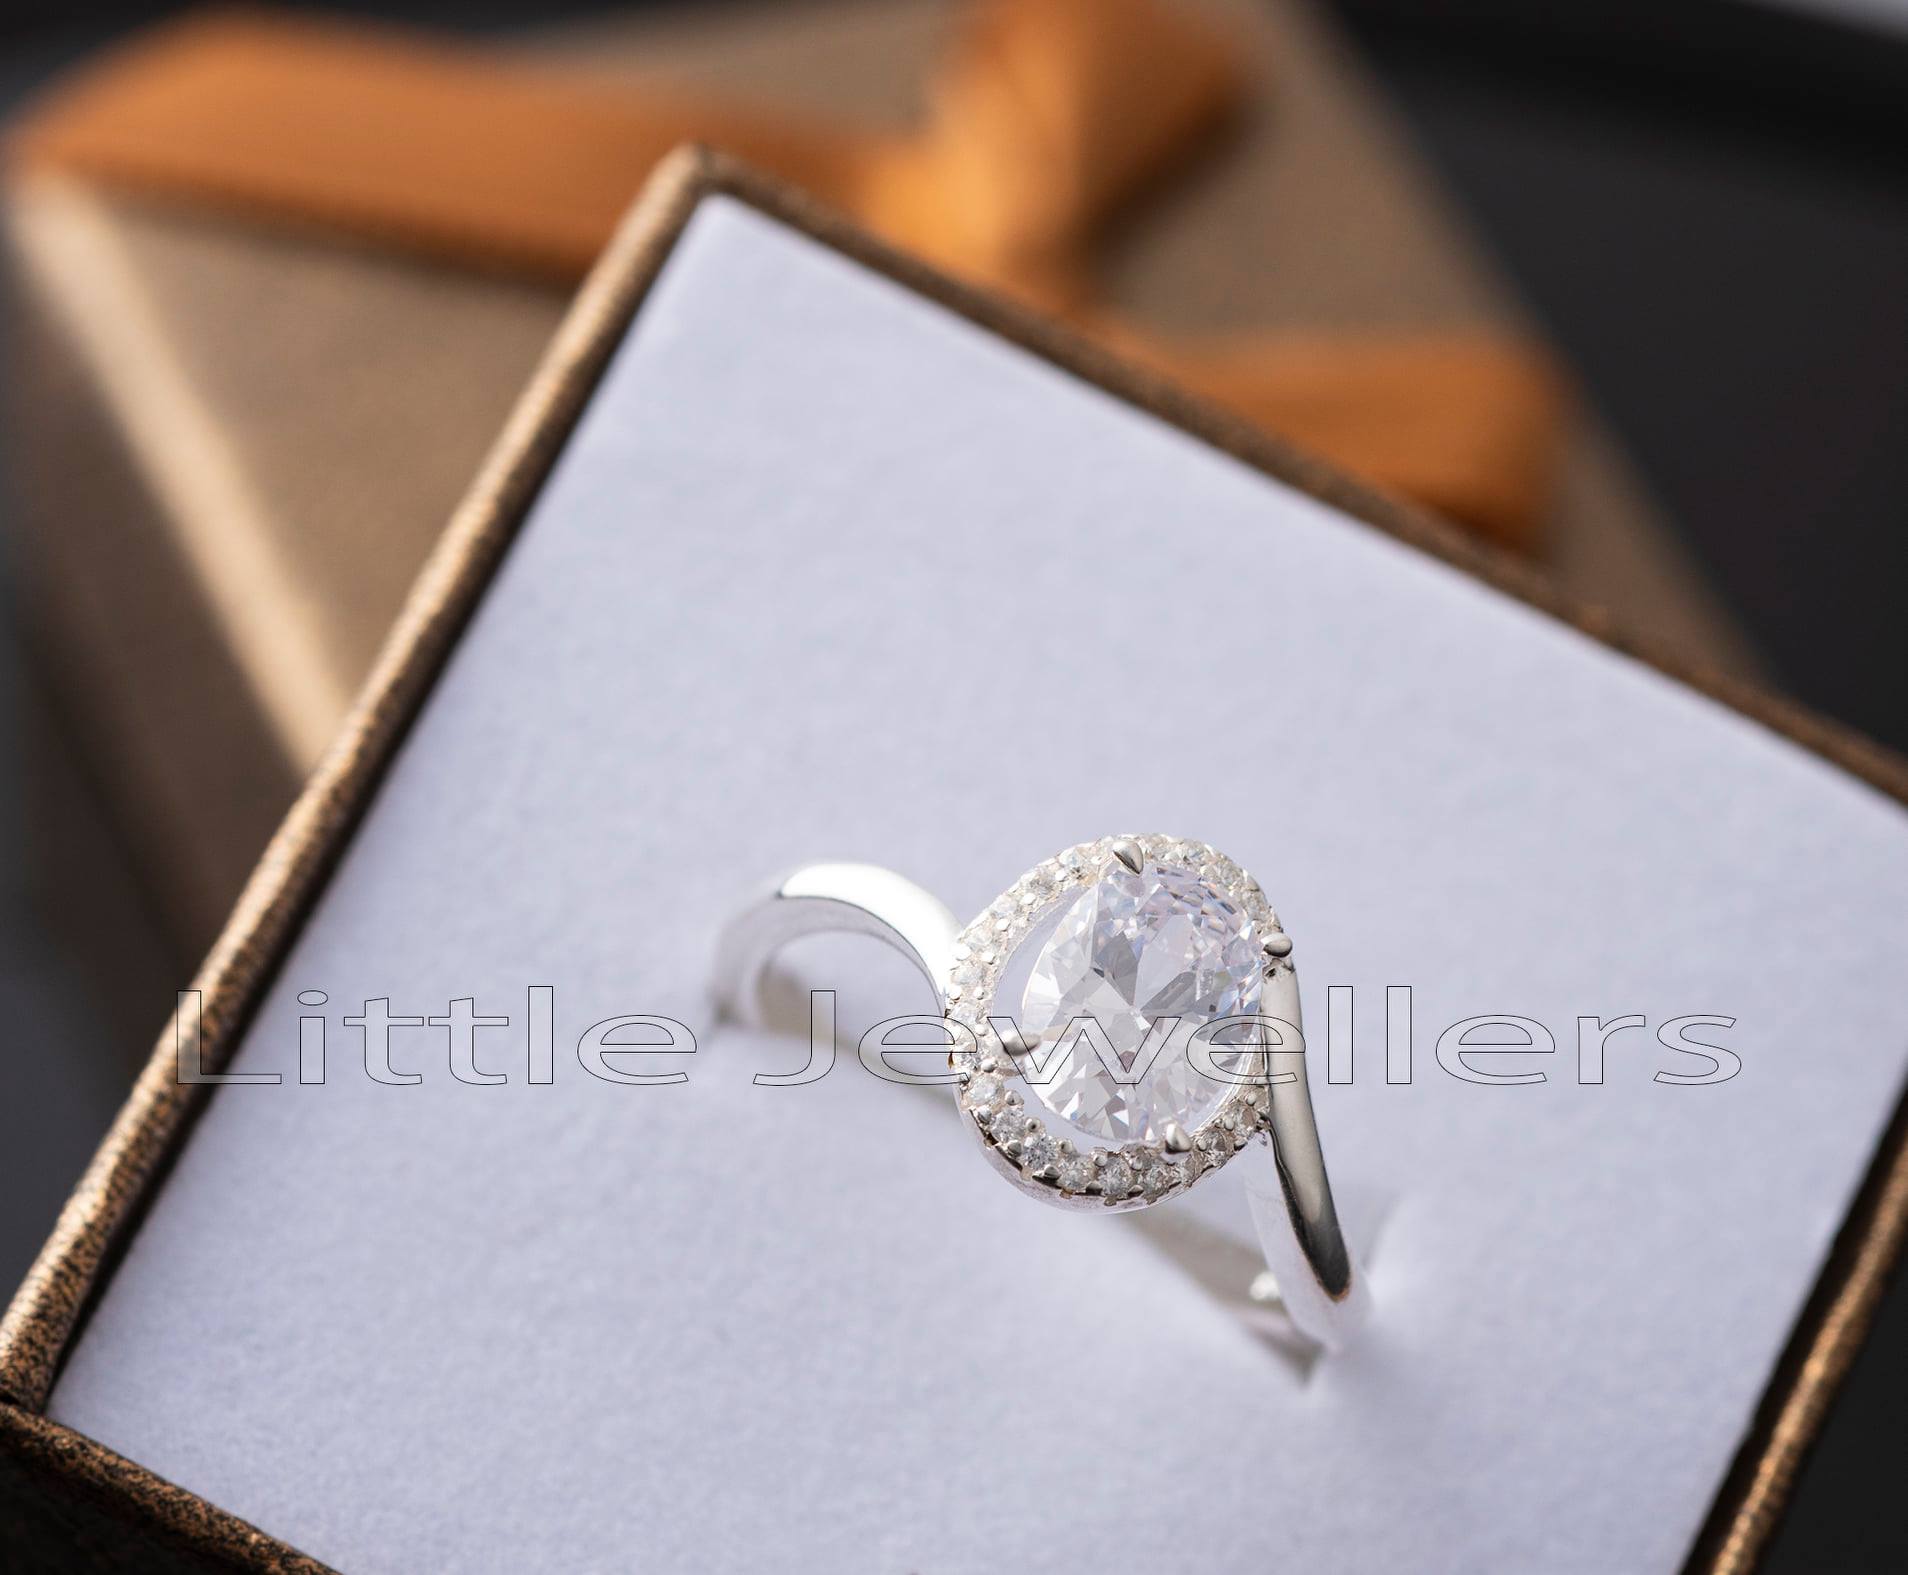 A striking halo setting sterling silver engagement ring, that is the perfect mix of charm and class